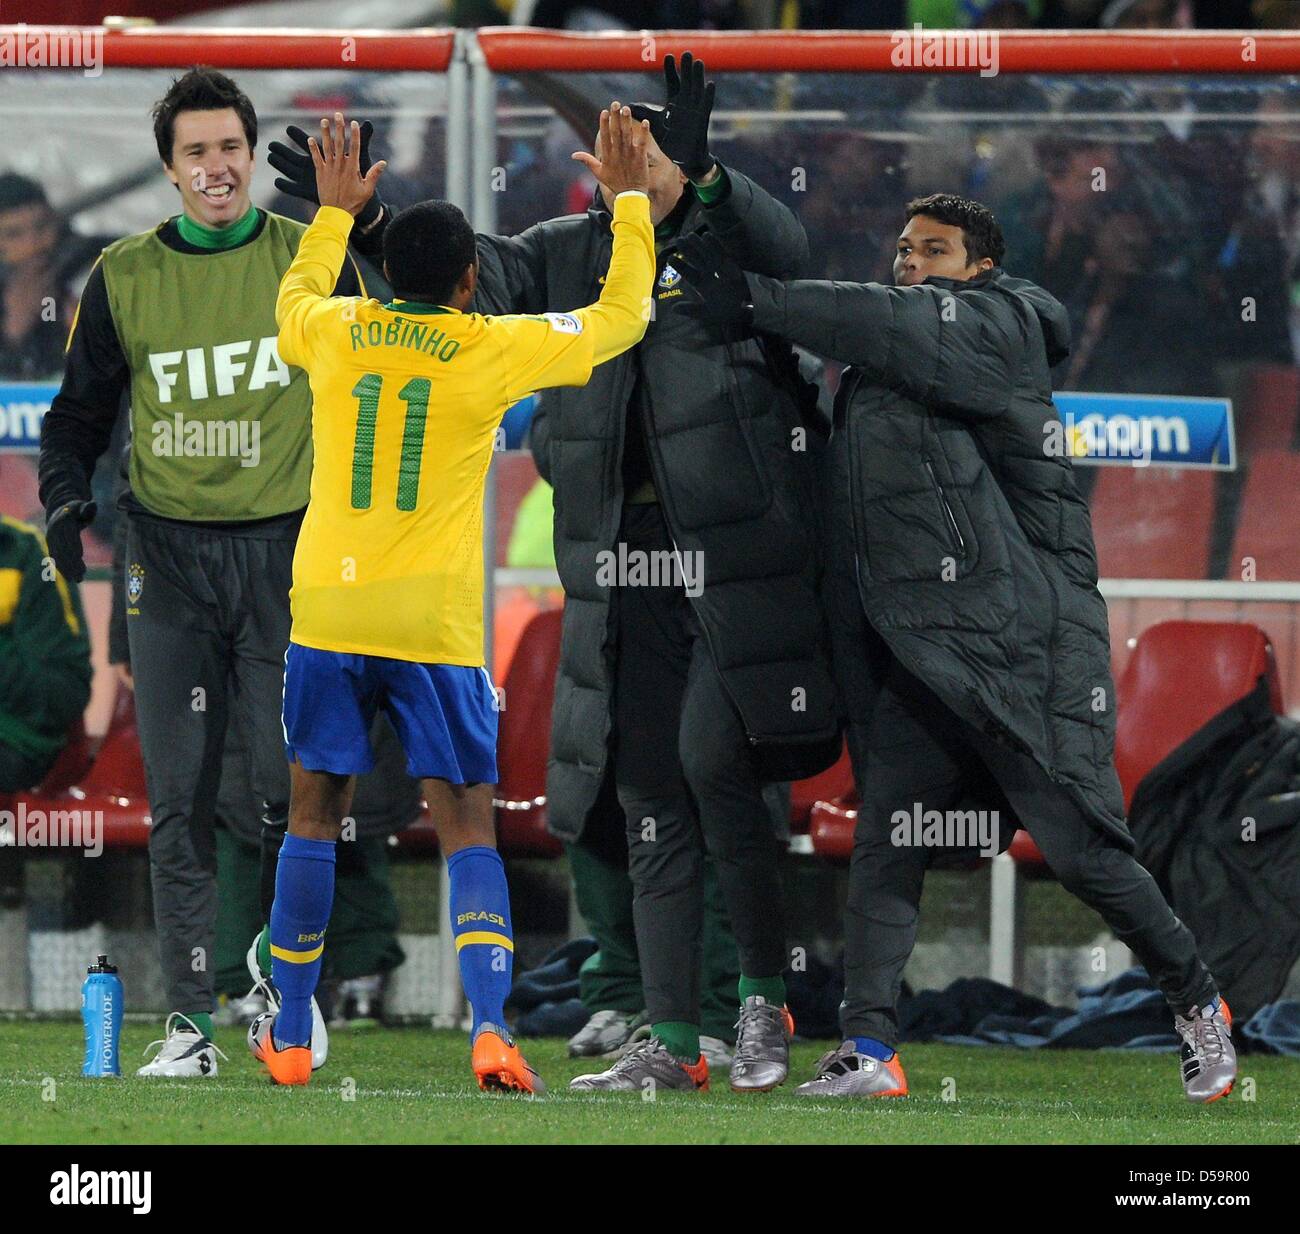 Brazil's Robinho celebrates scoring the 3-0 with substitute players during the 2010 FIFA World Cup Round of Sixteen match between Brazil and Chile at the Ellis Park Stadium in Johannesburg, South Africa 28 June 2010. Photo: Marcus Brandt dpa - Please refer to http://dpaq.de/FIFA-WM2010-TC Stock Photo